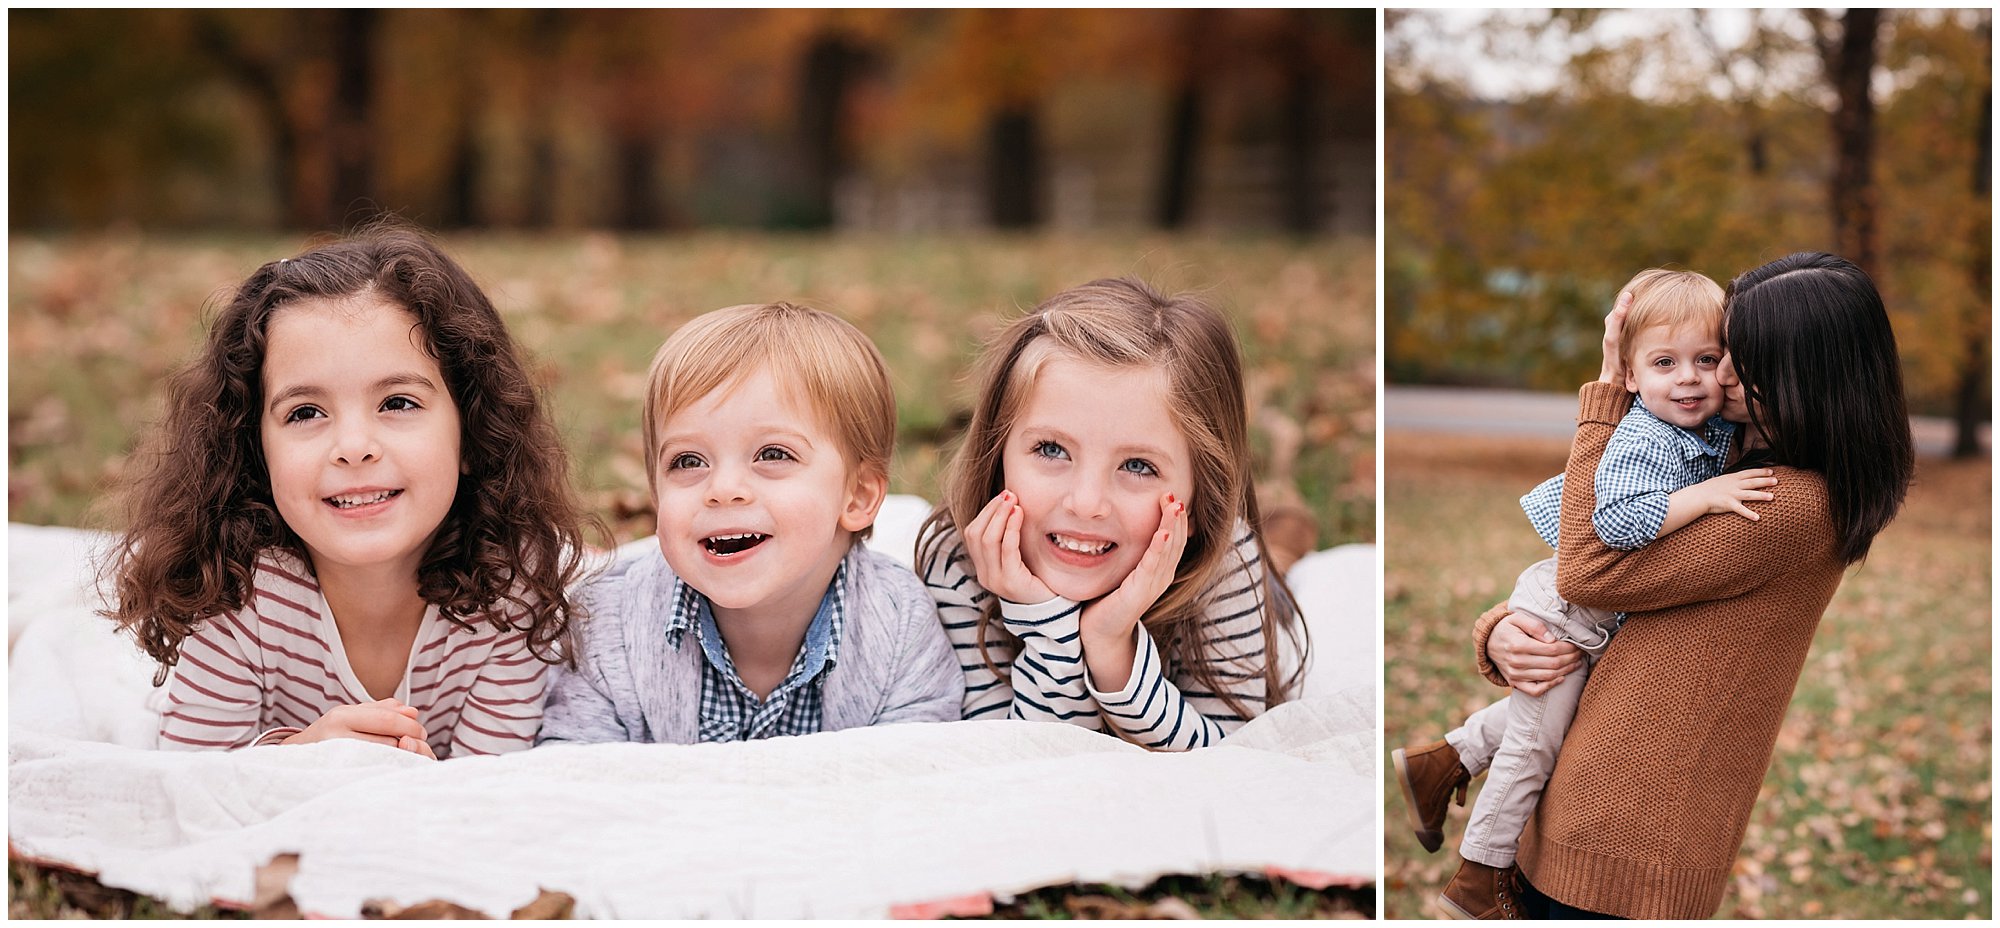 meredithteasleyphotography_fall2016_Nashville_mini_sessions_2